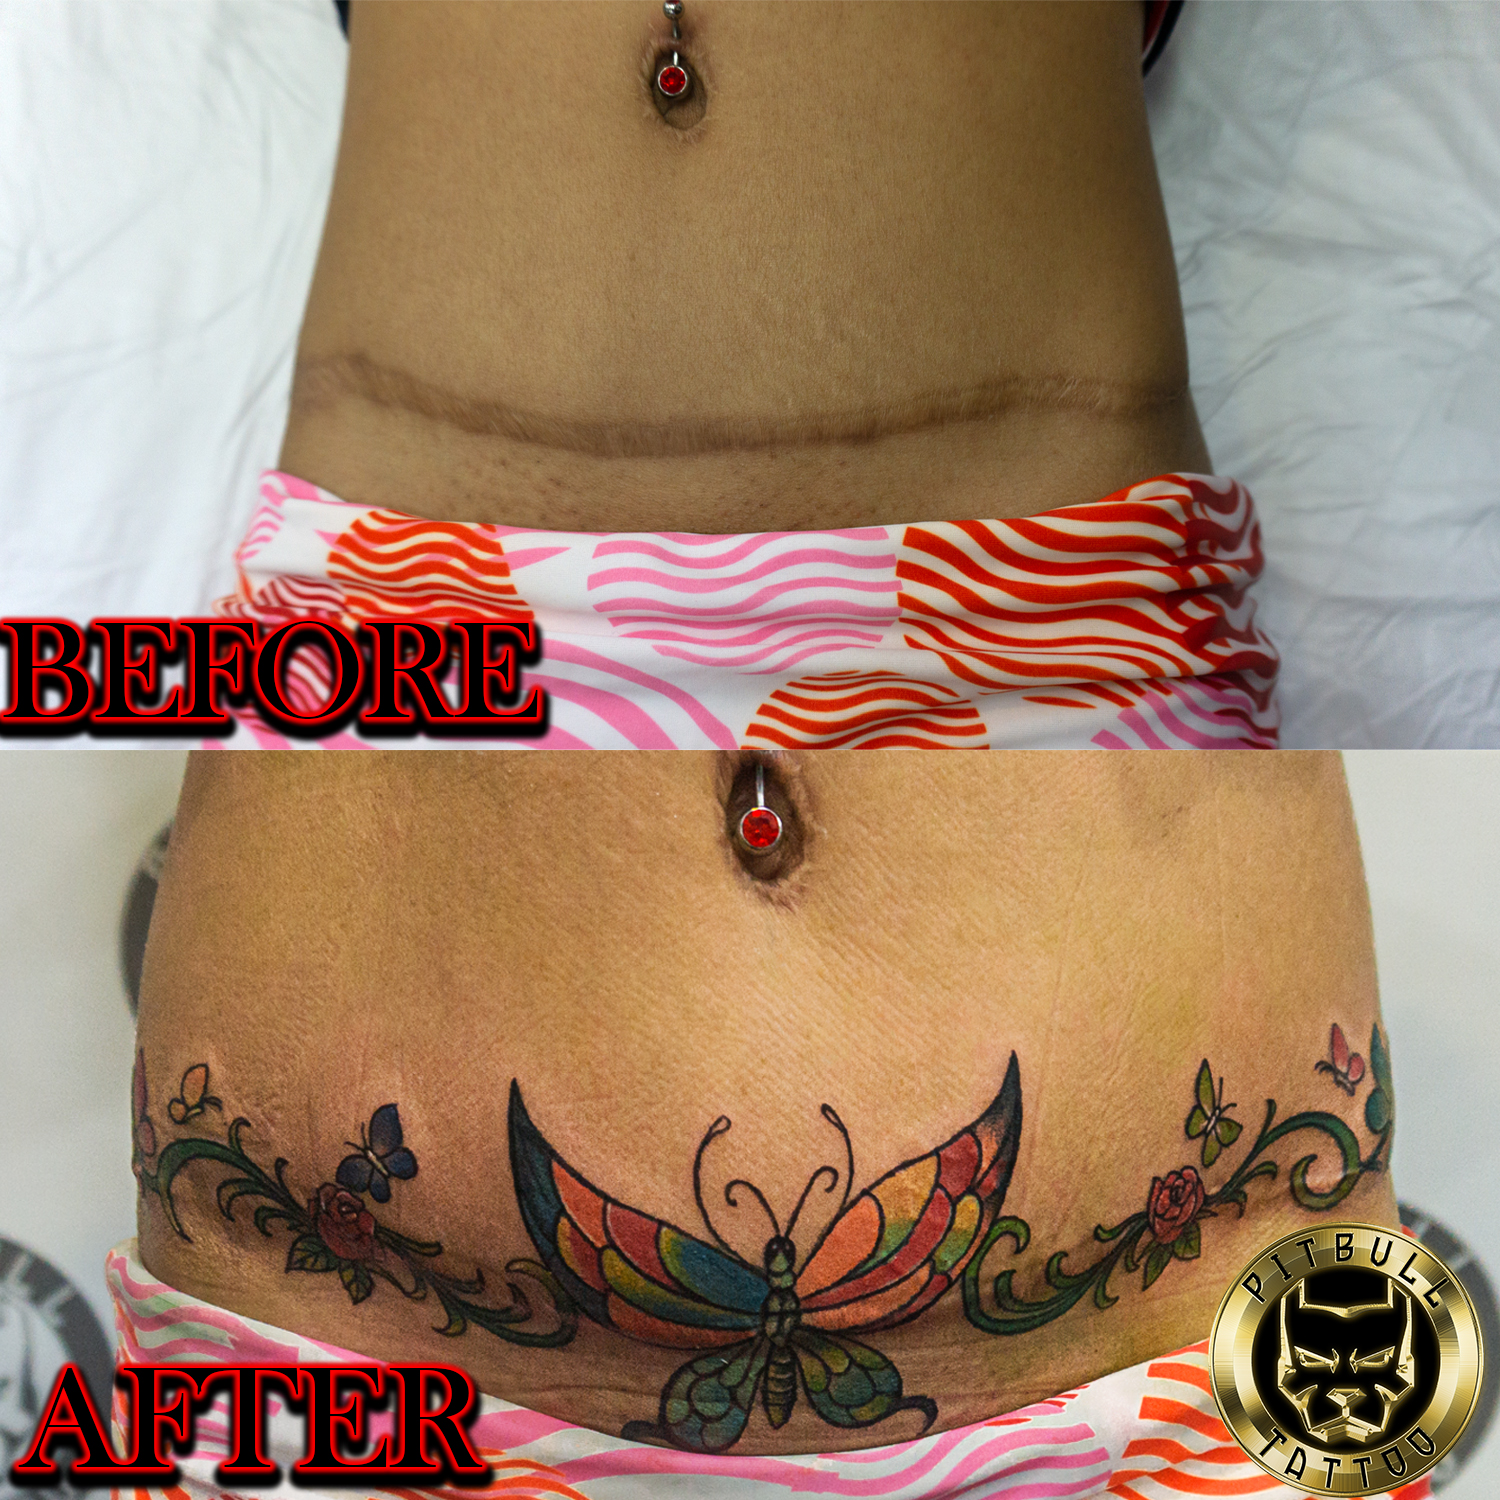 Over Scars Tattoo Specialization